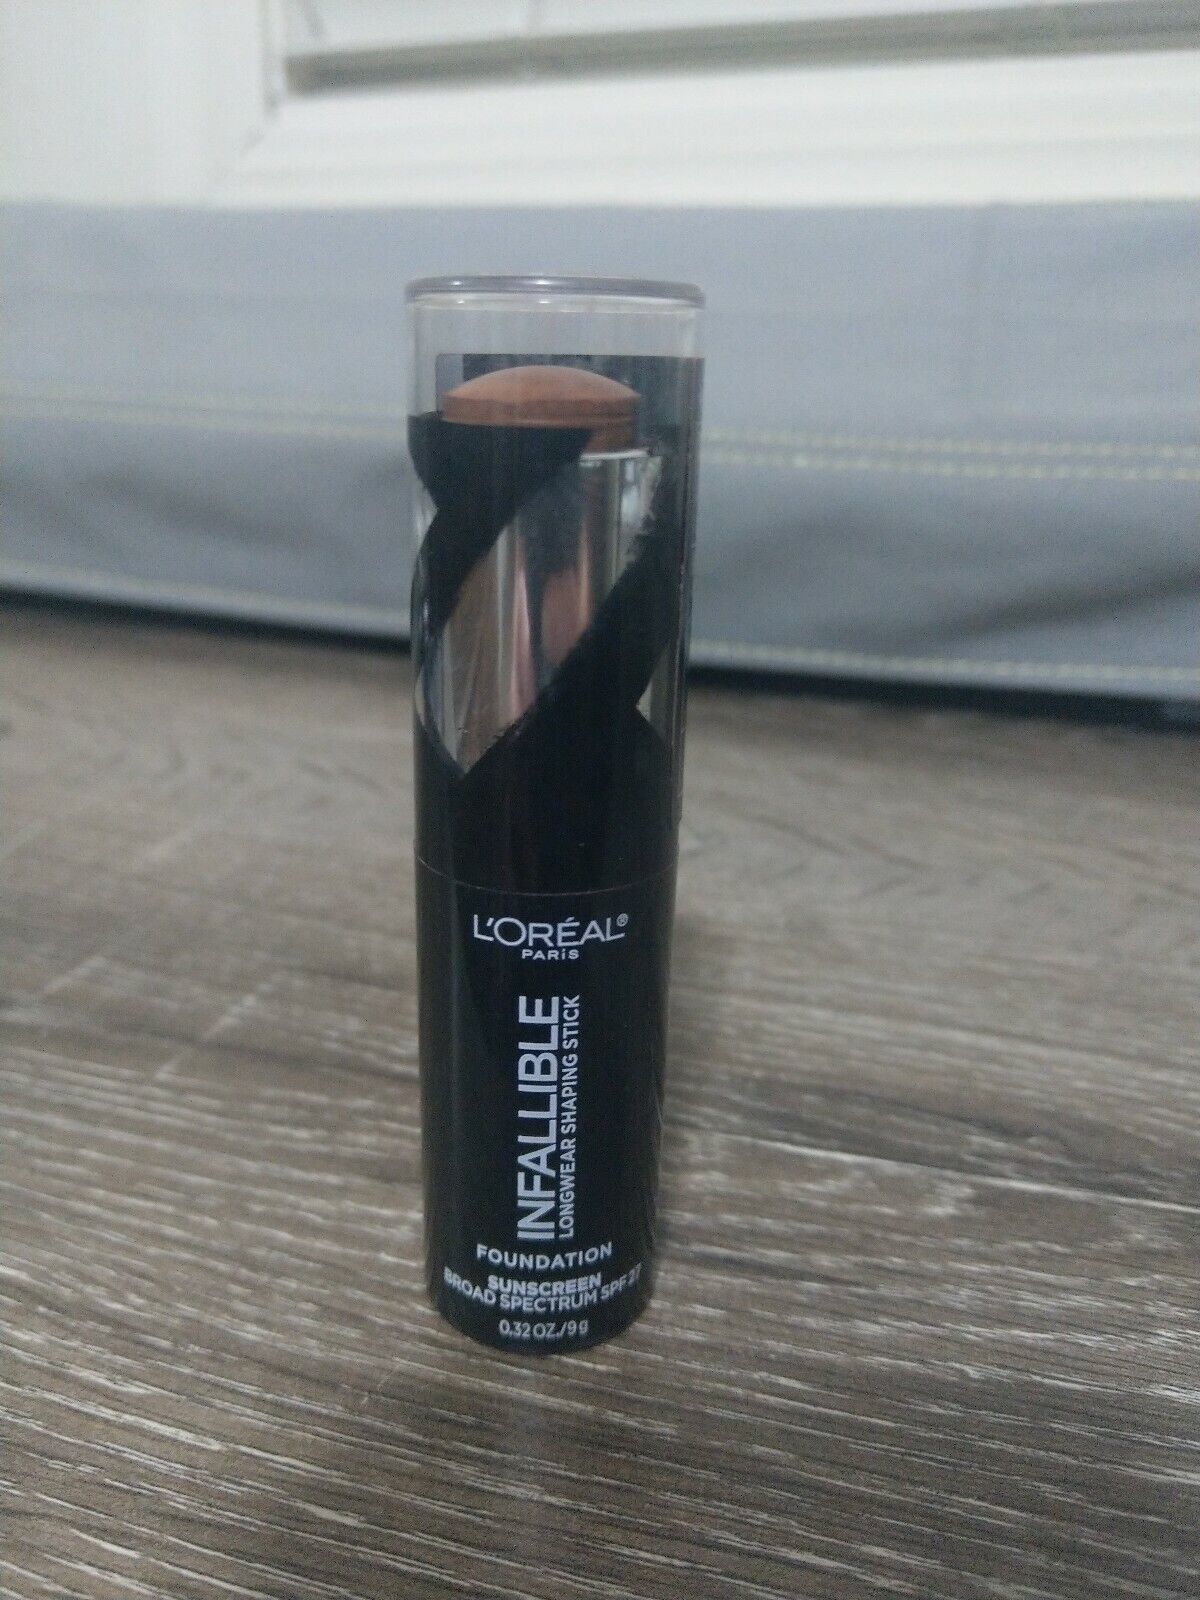 Primary image for (1) Loreal Infallible Longwear Shaping Stick Foundation SPF27, 412 Espresso New